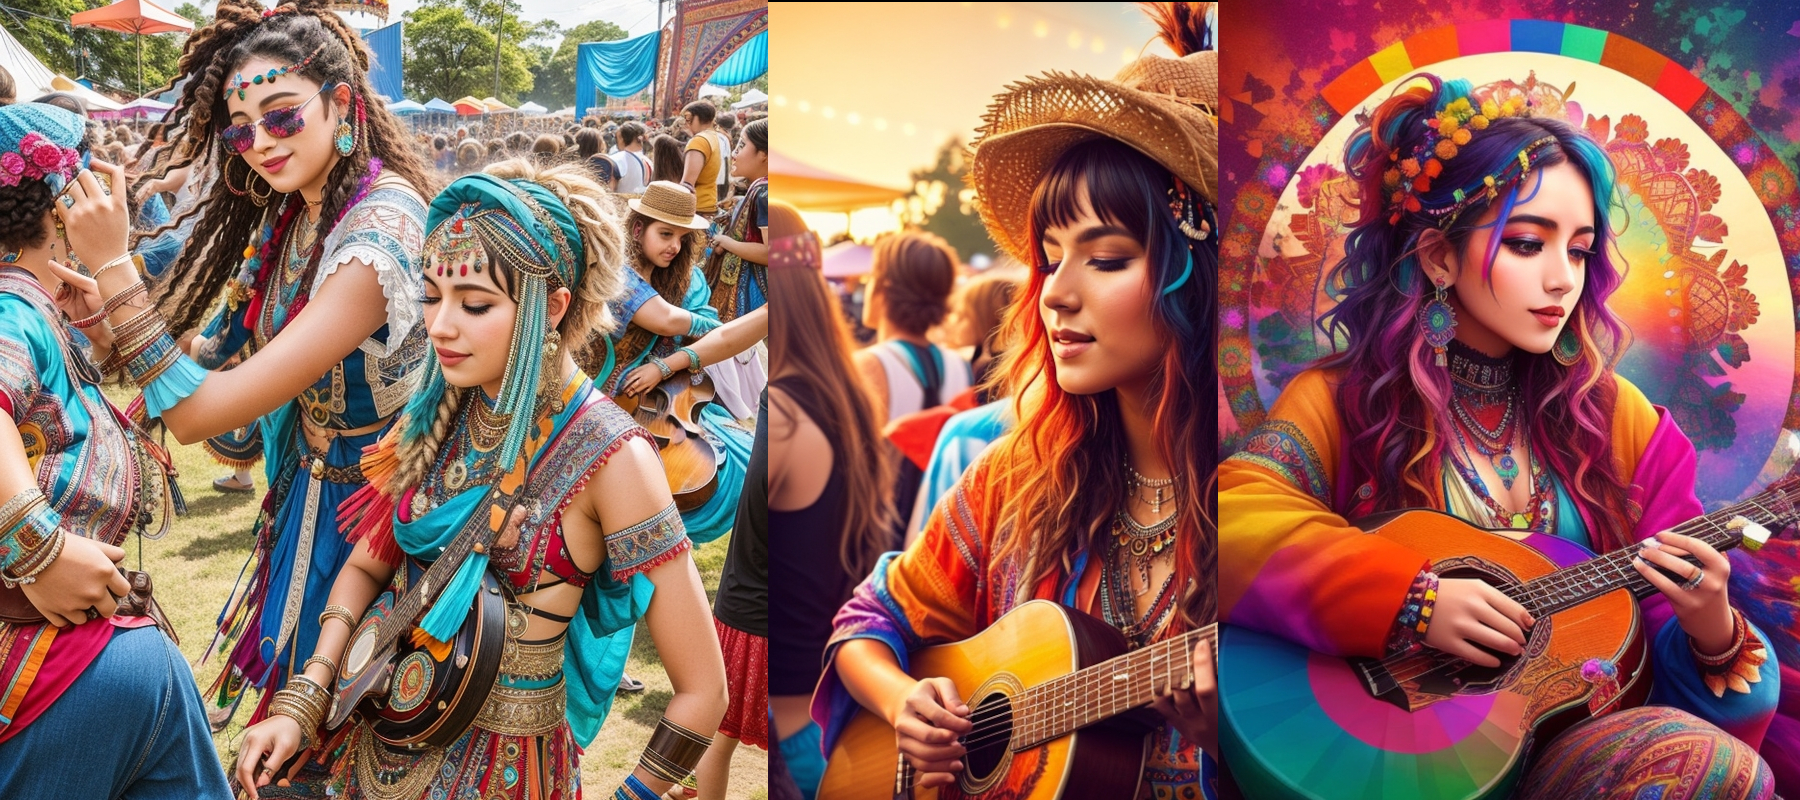 Bohemian style festival with people wearing colorful boho chic fashion